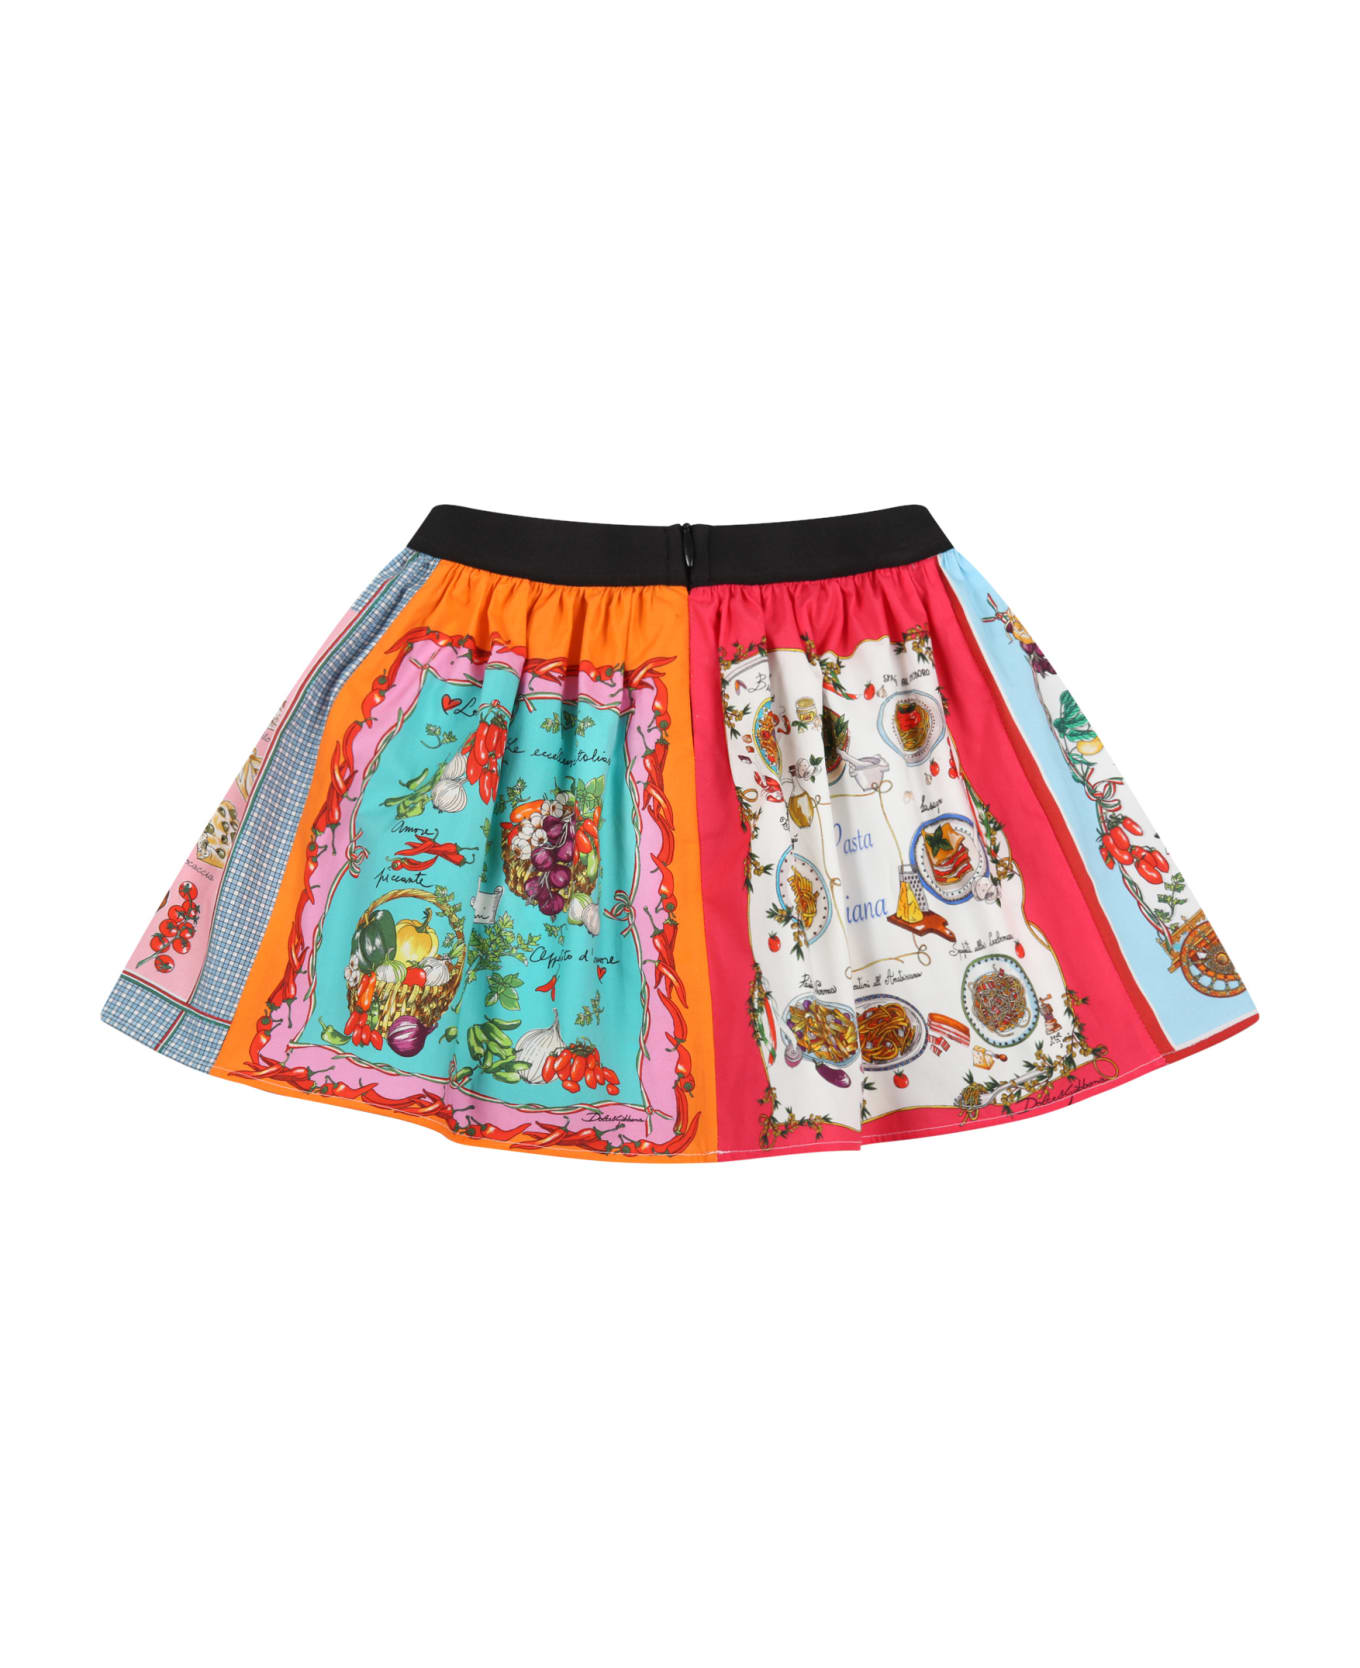 Dolce & Gabbana Multicolor Skirt For Baby Girl With Prints - Multicolor